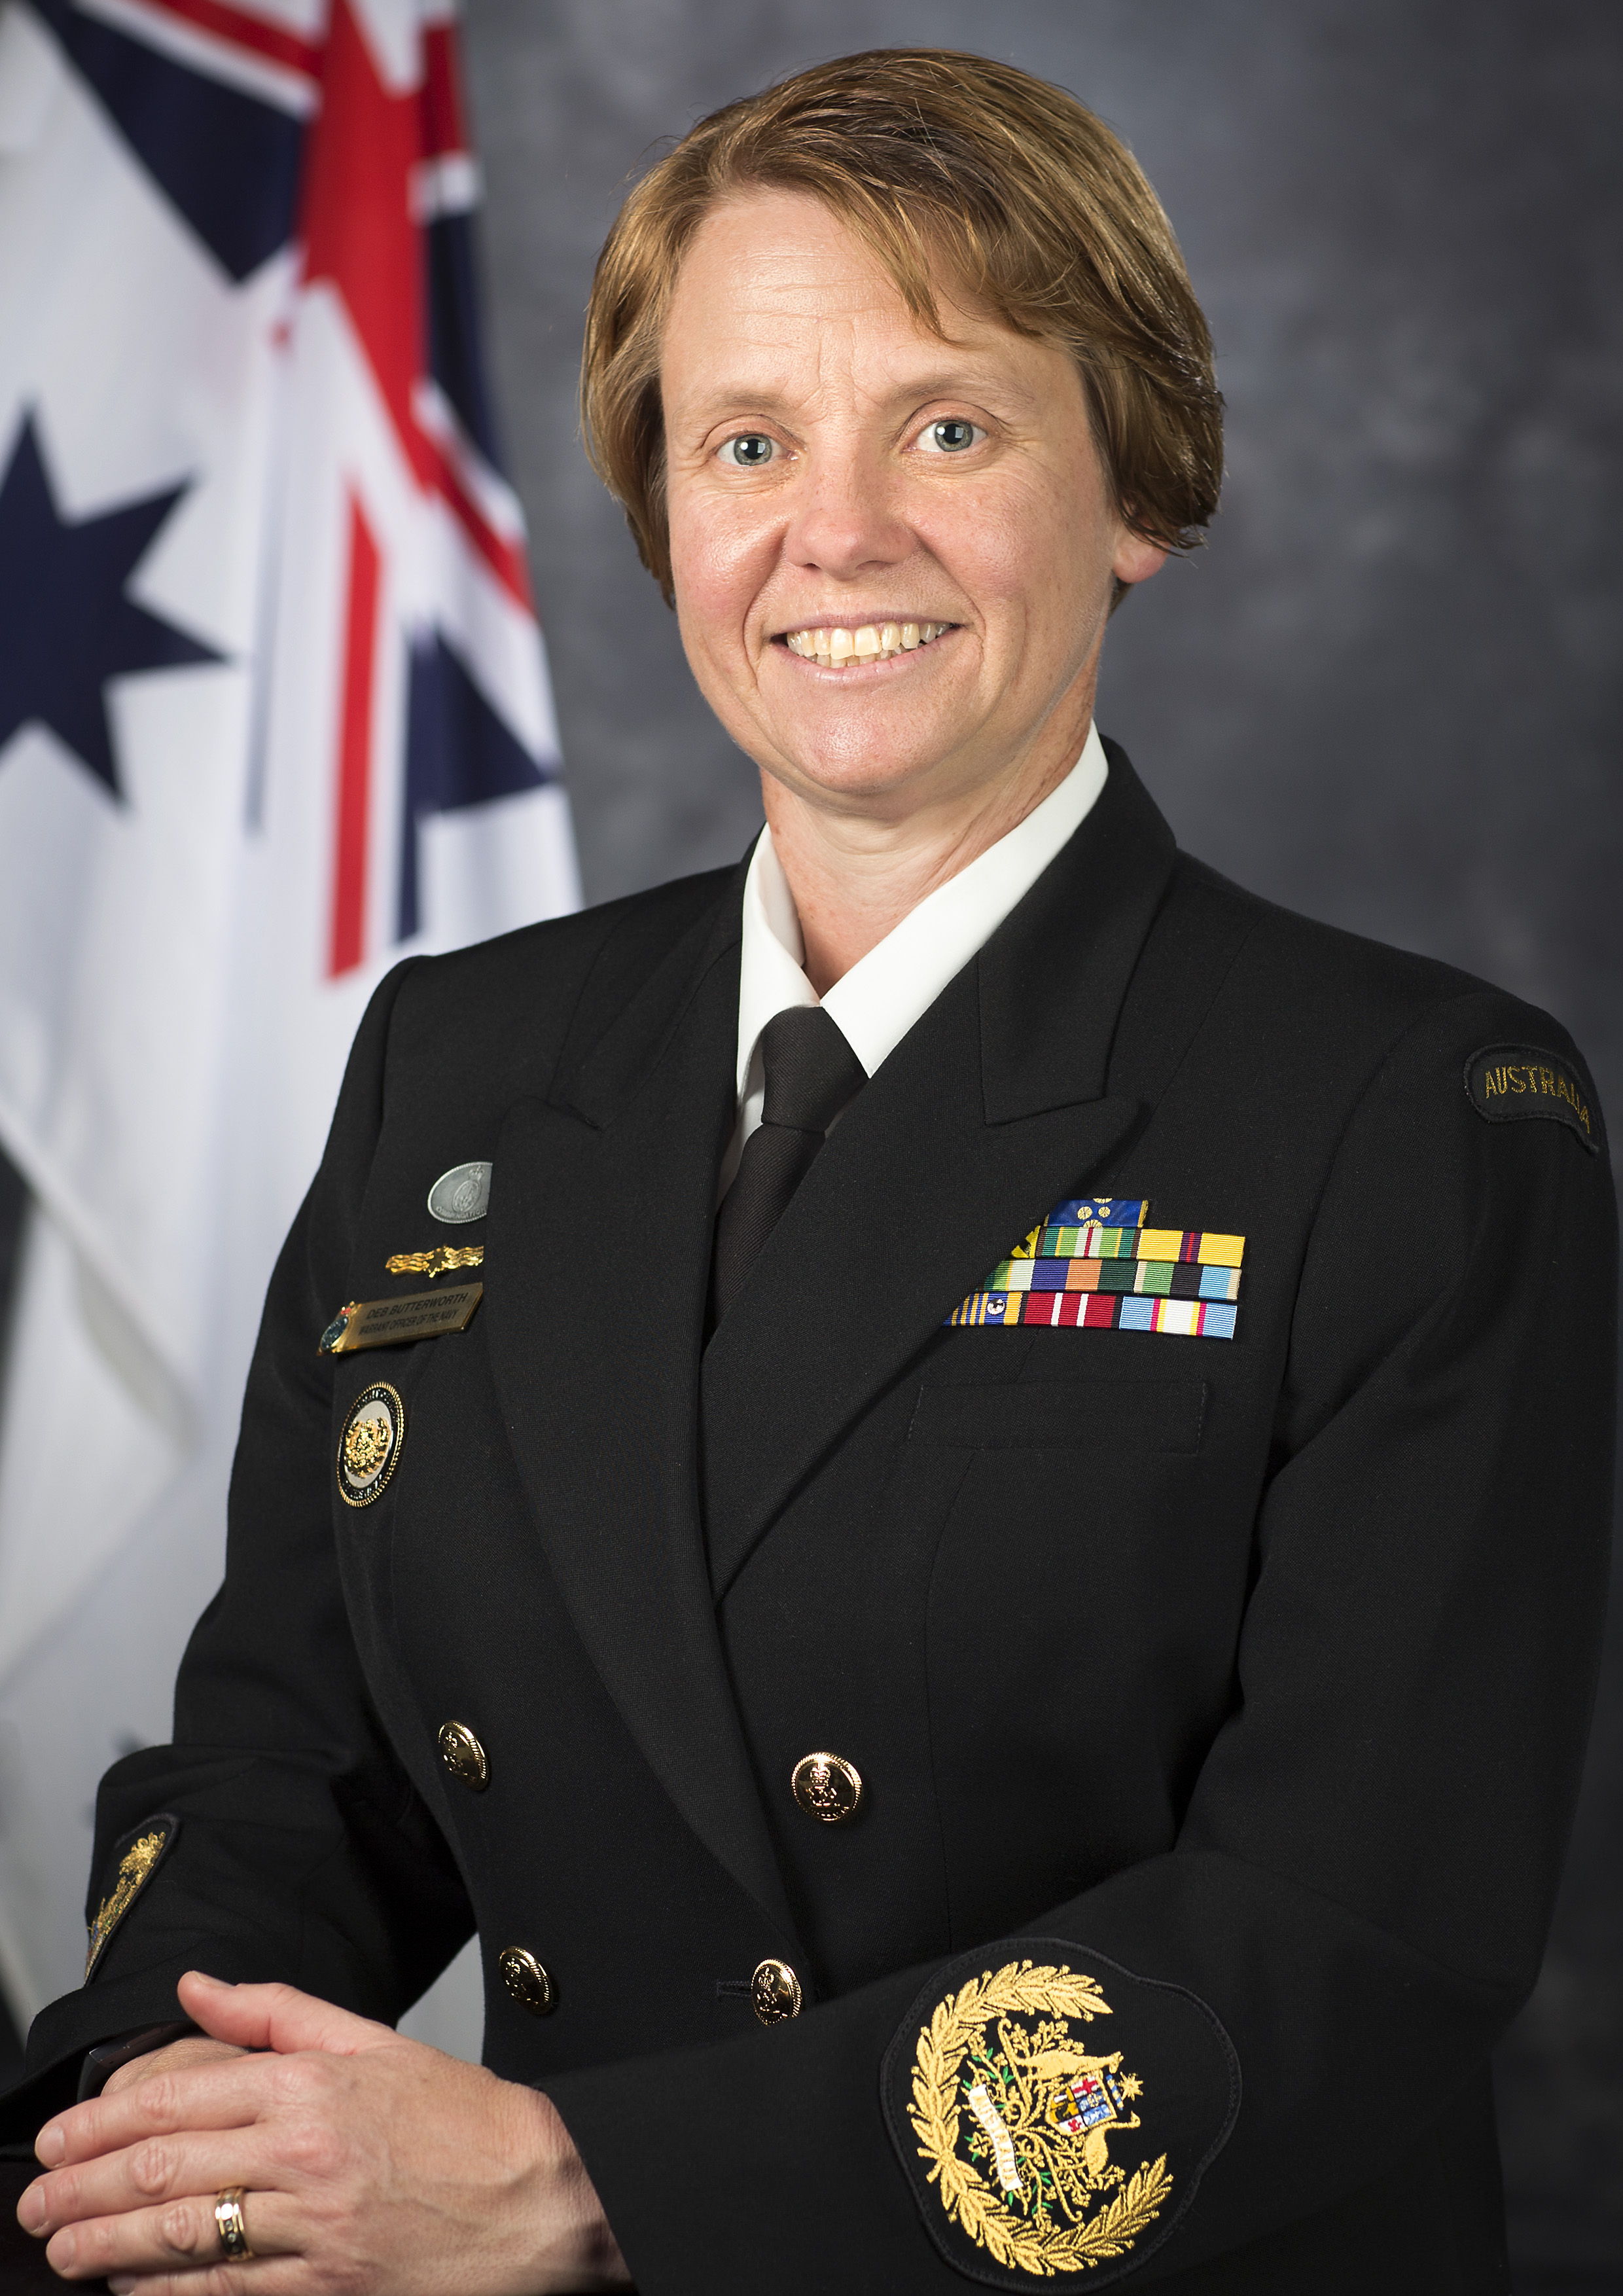 Warrant Officer of the Navy, Deb Butterworth, OAM, CSM and Bar